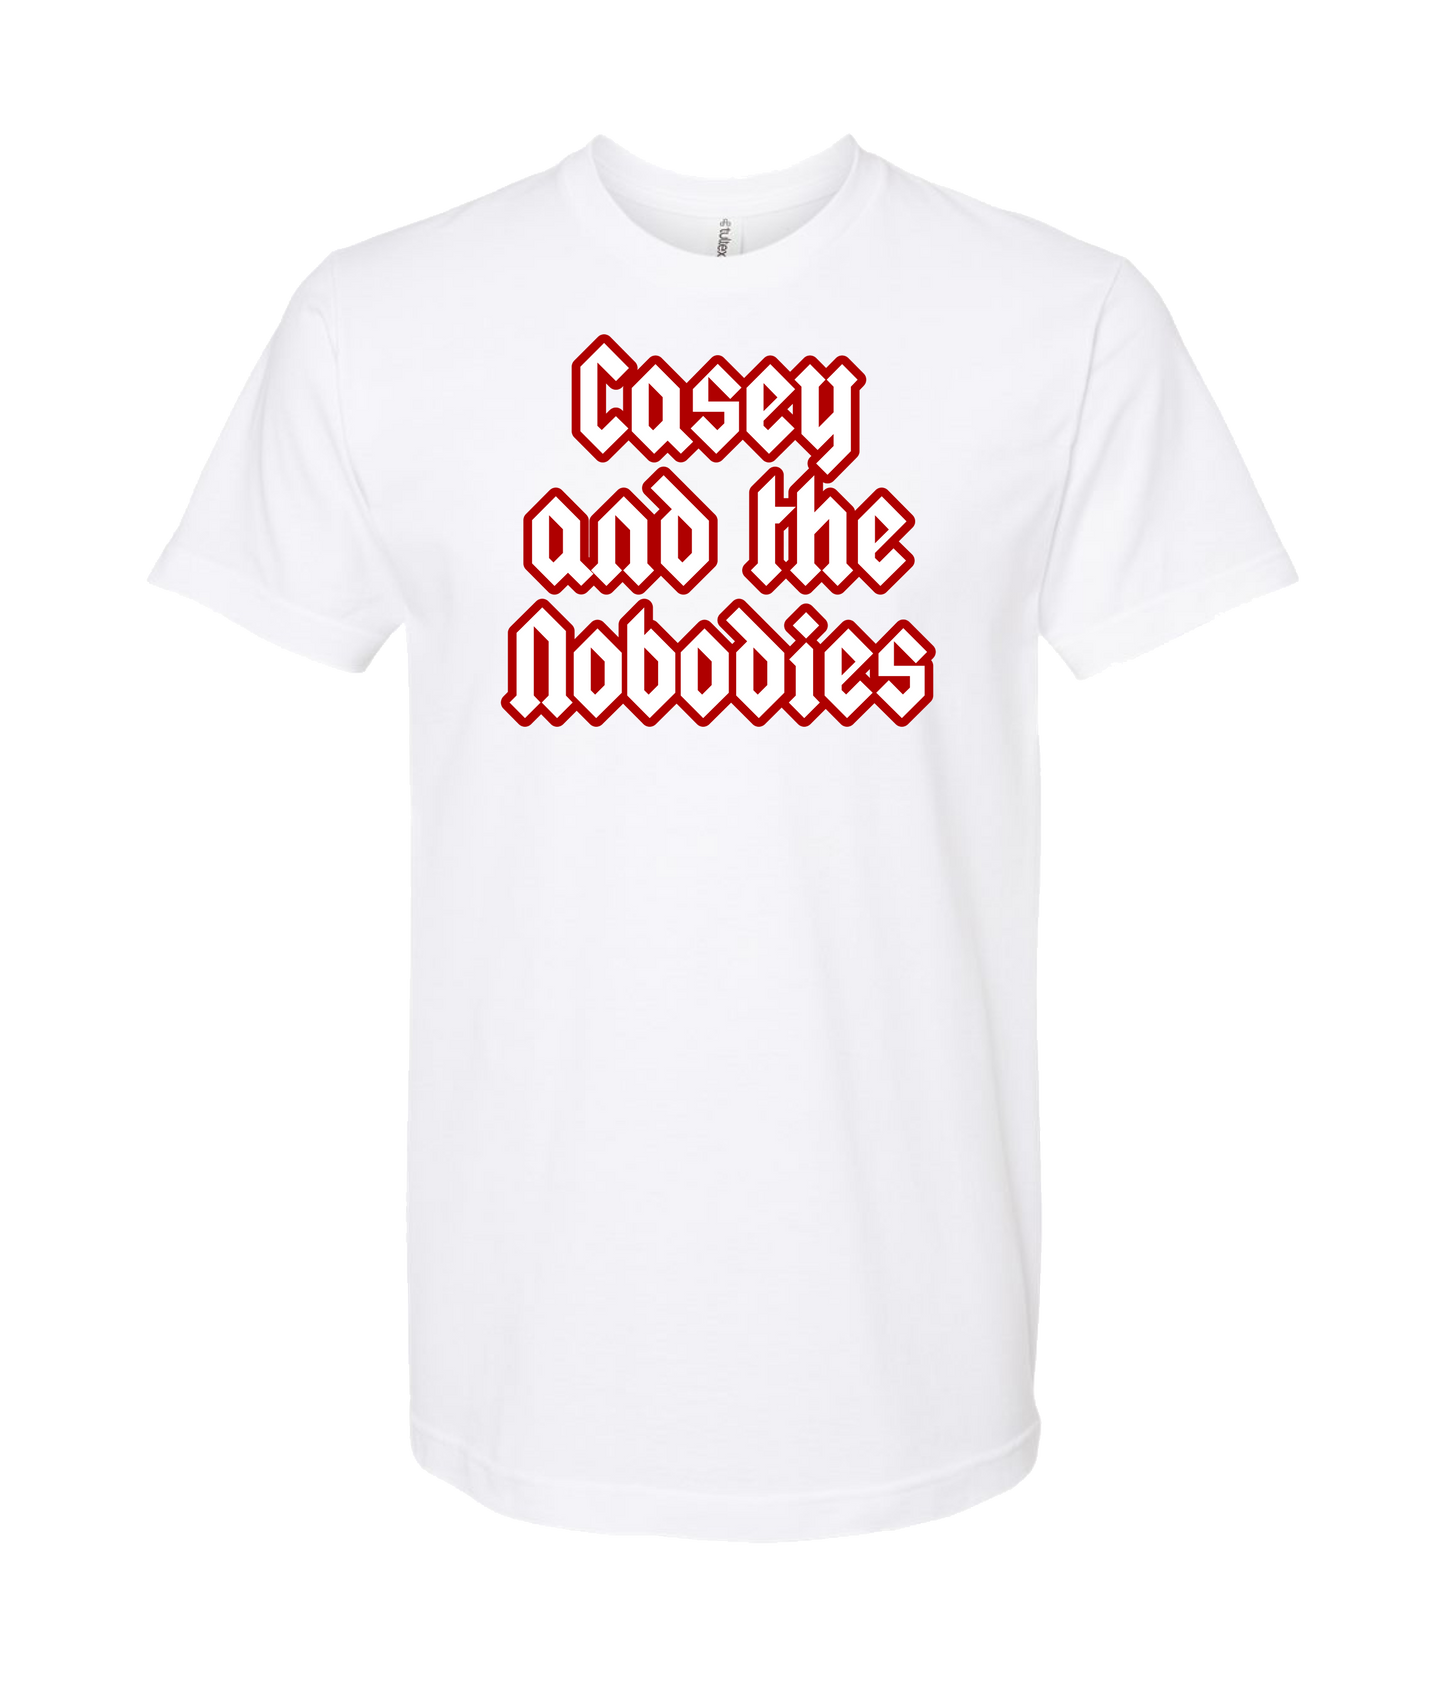 Casey and the Nobodies
 - Logo - White T-Shirt